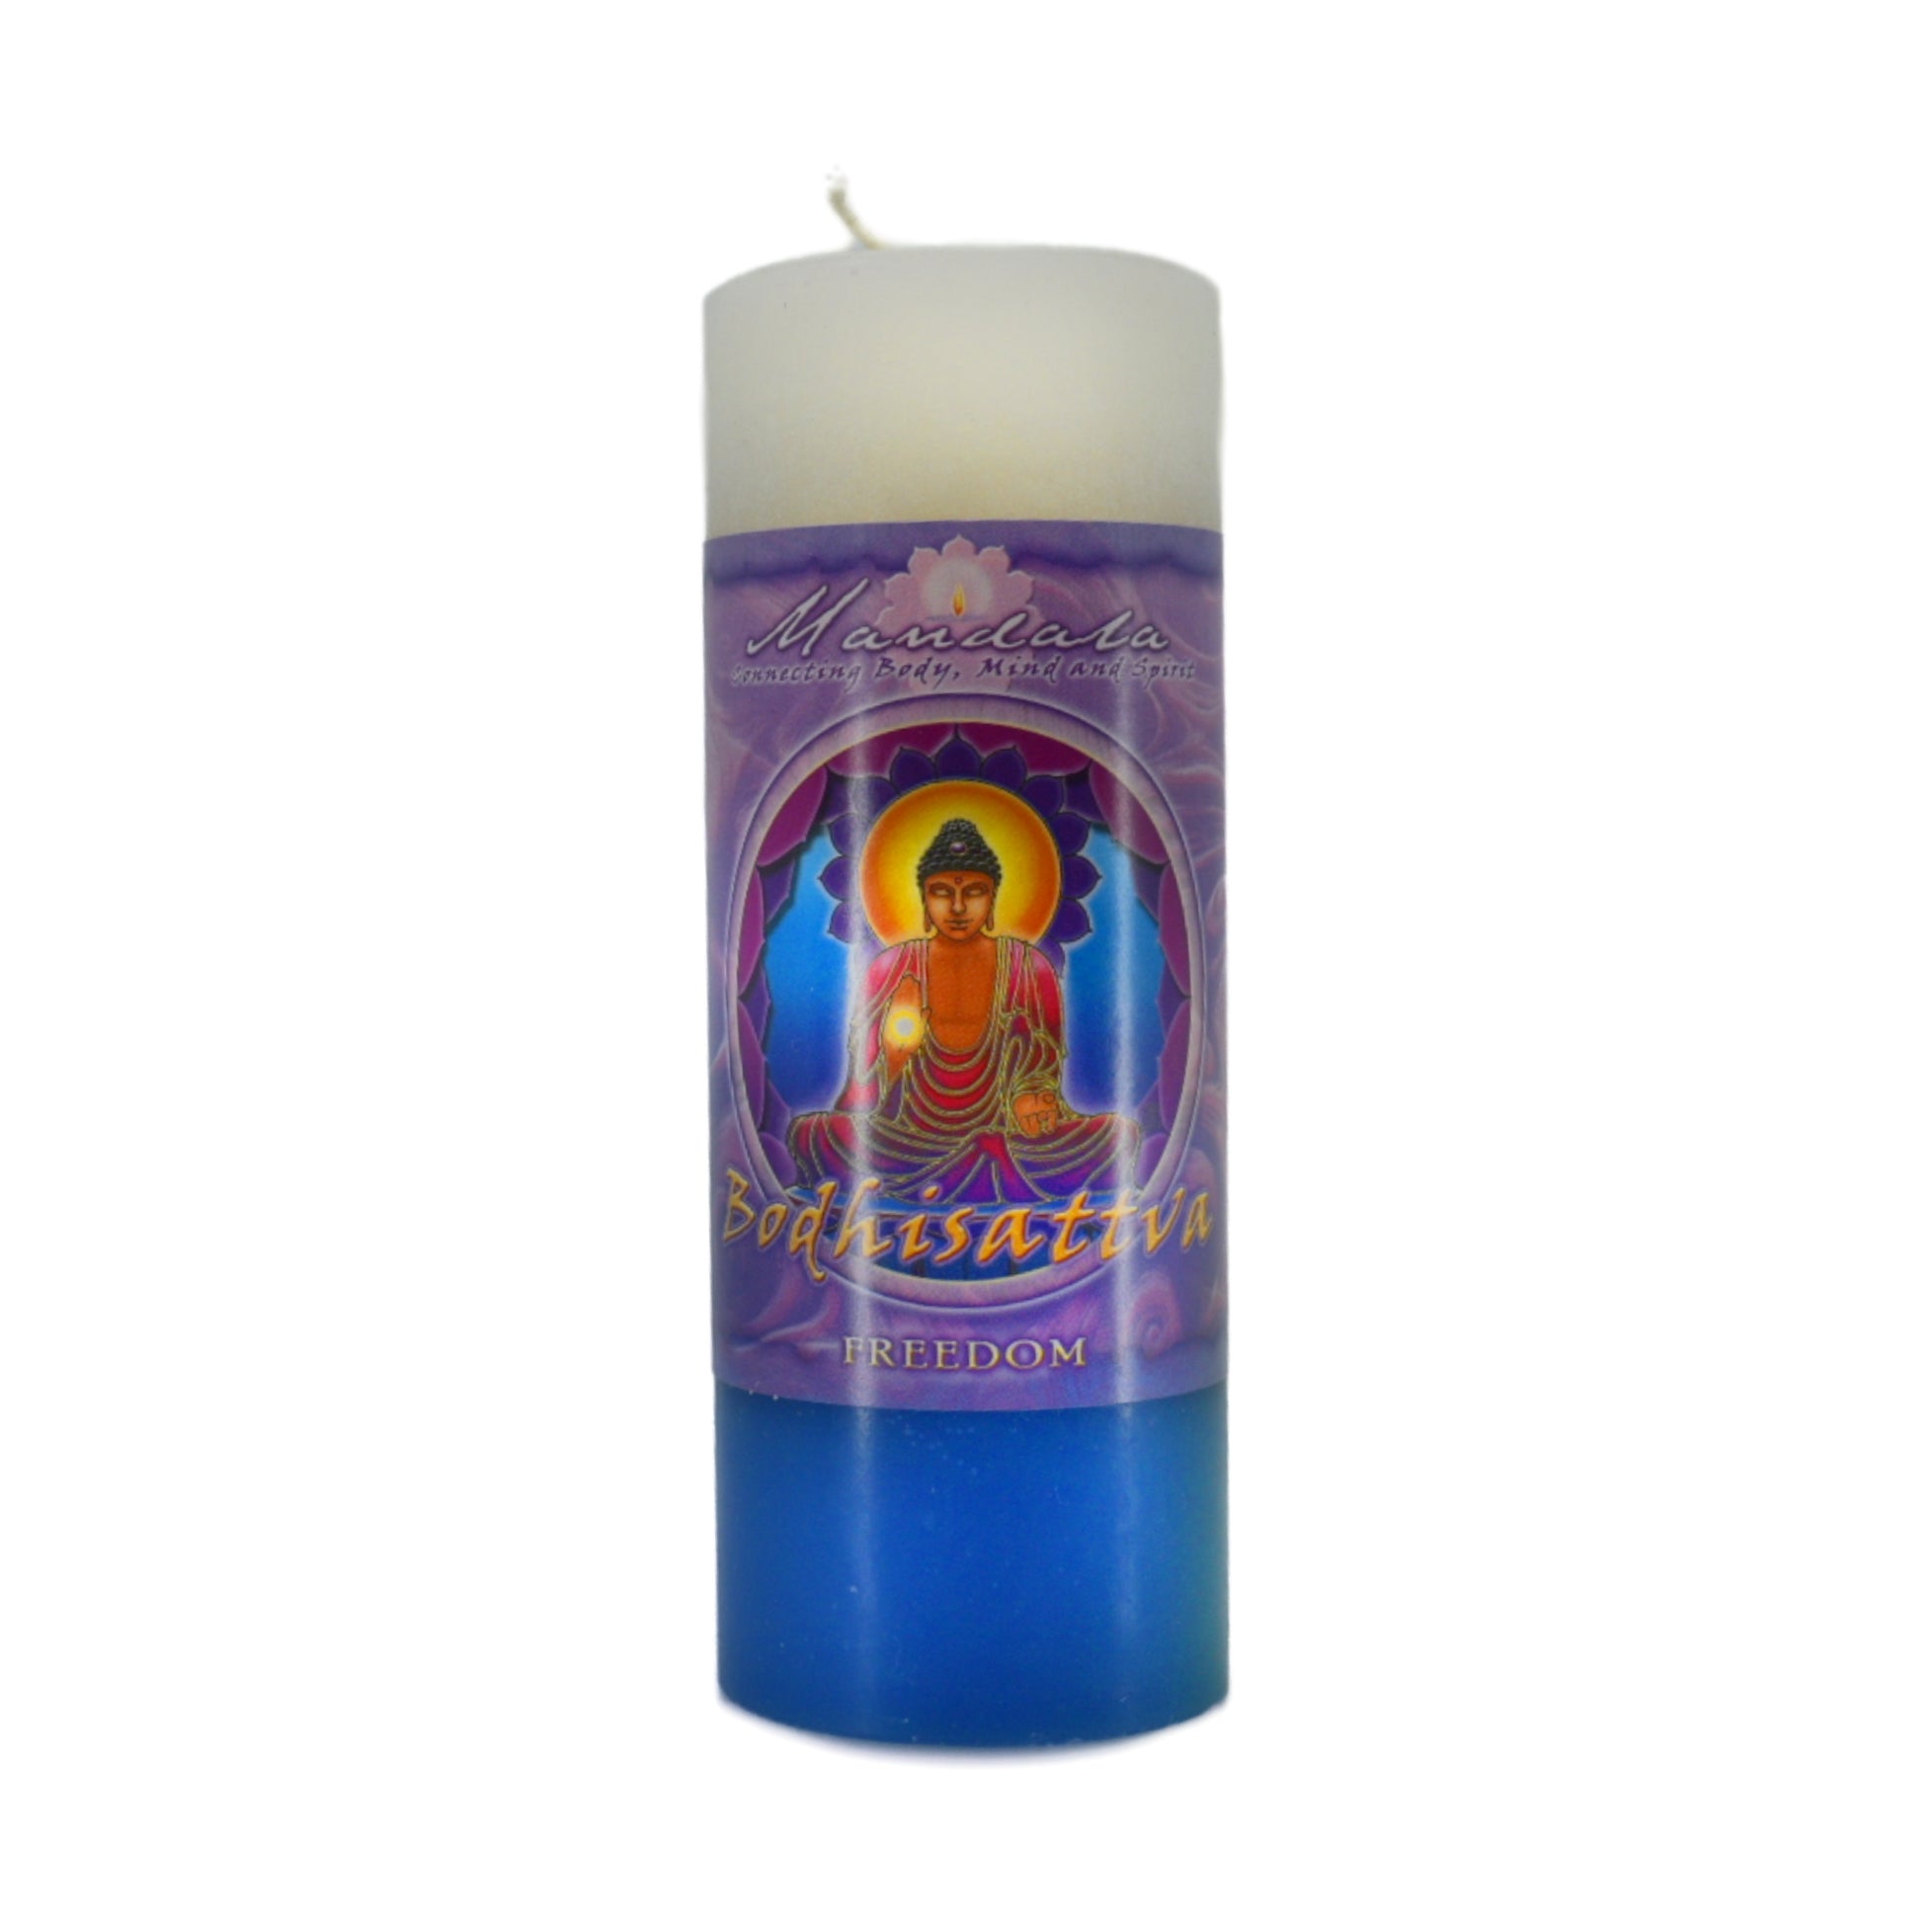 Freedom Mandala Candle.  This white candle is scented with musk, clove and lavender essential oils.  Burn the candle to enhance sacred inner knowledge, enlightenment, peace and freedom.